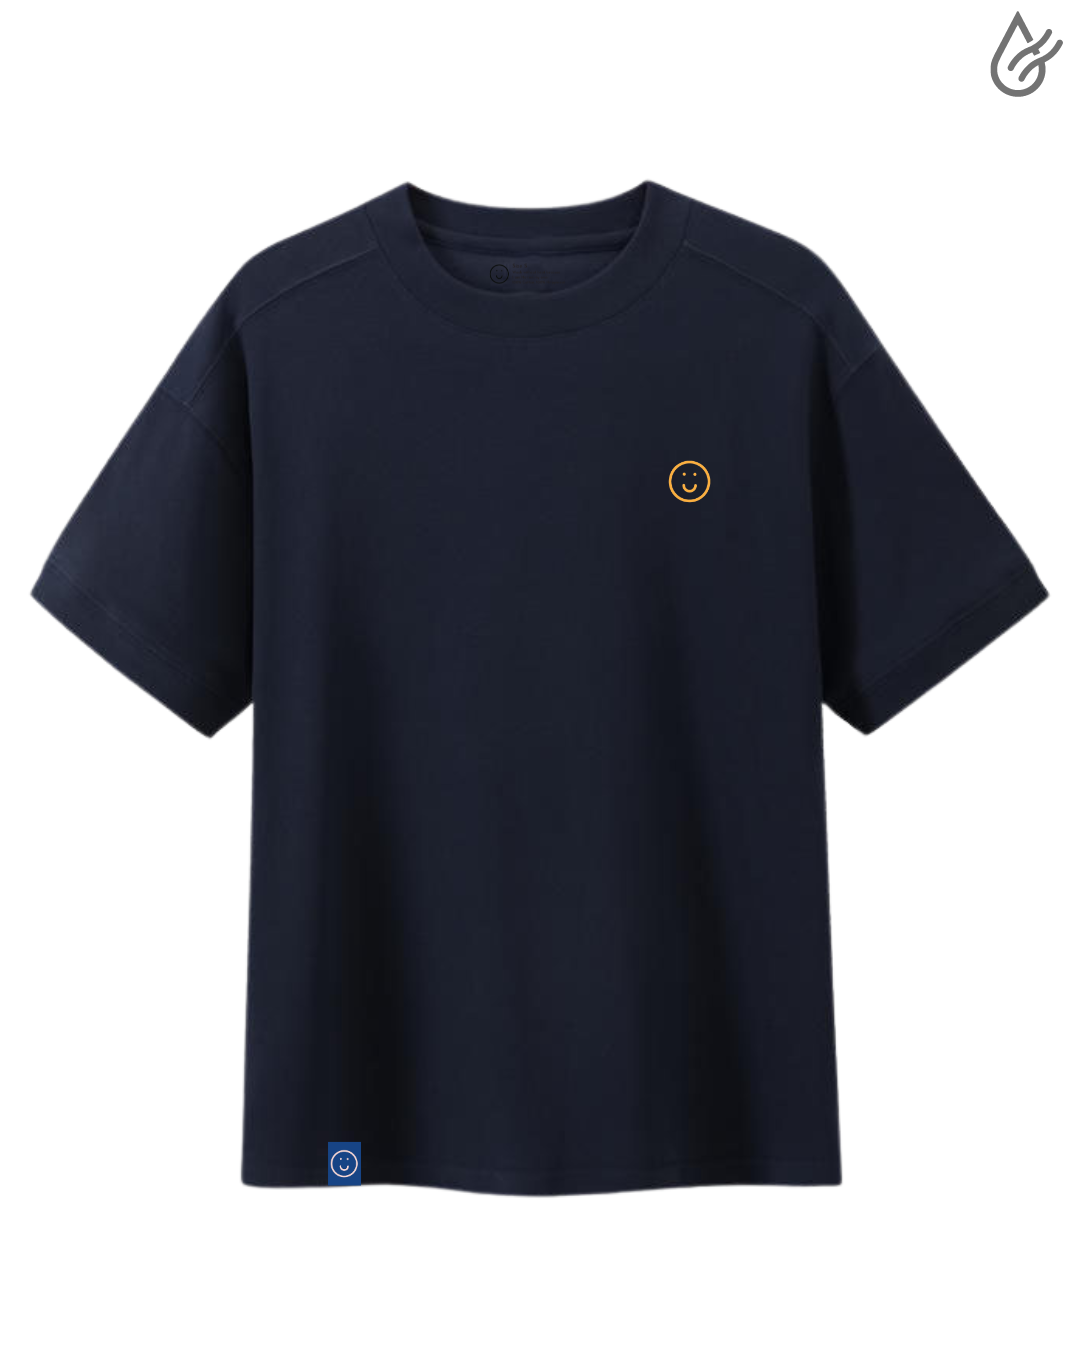 Signature "Air-con" Tee in Navy